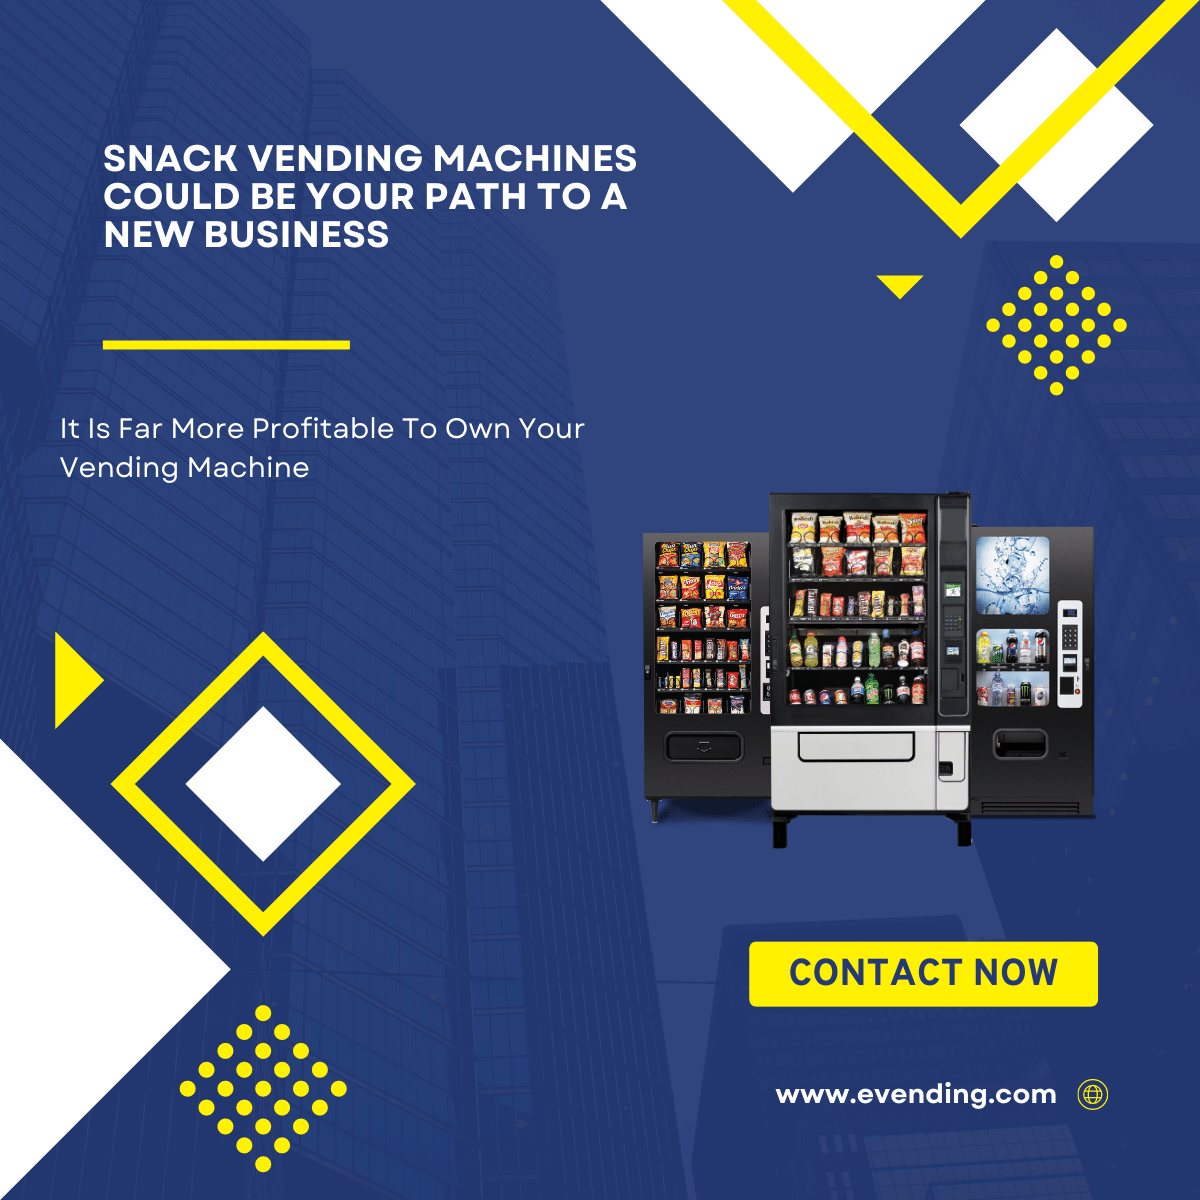 HAVE YOU BEEN LOOKING FOR A VENDING MACHINE FOR YOUR BUSINESS?